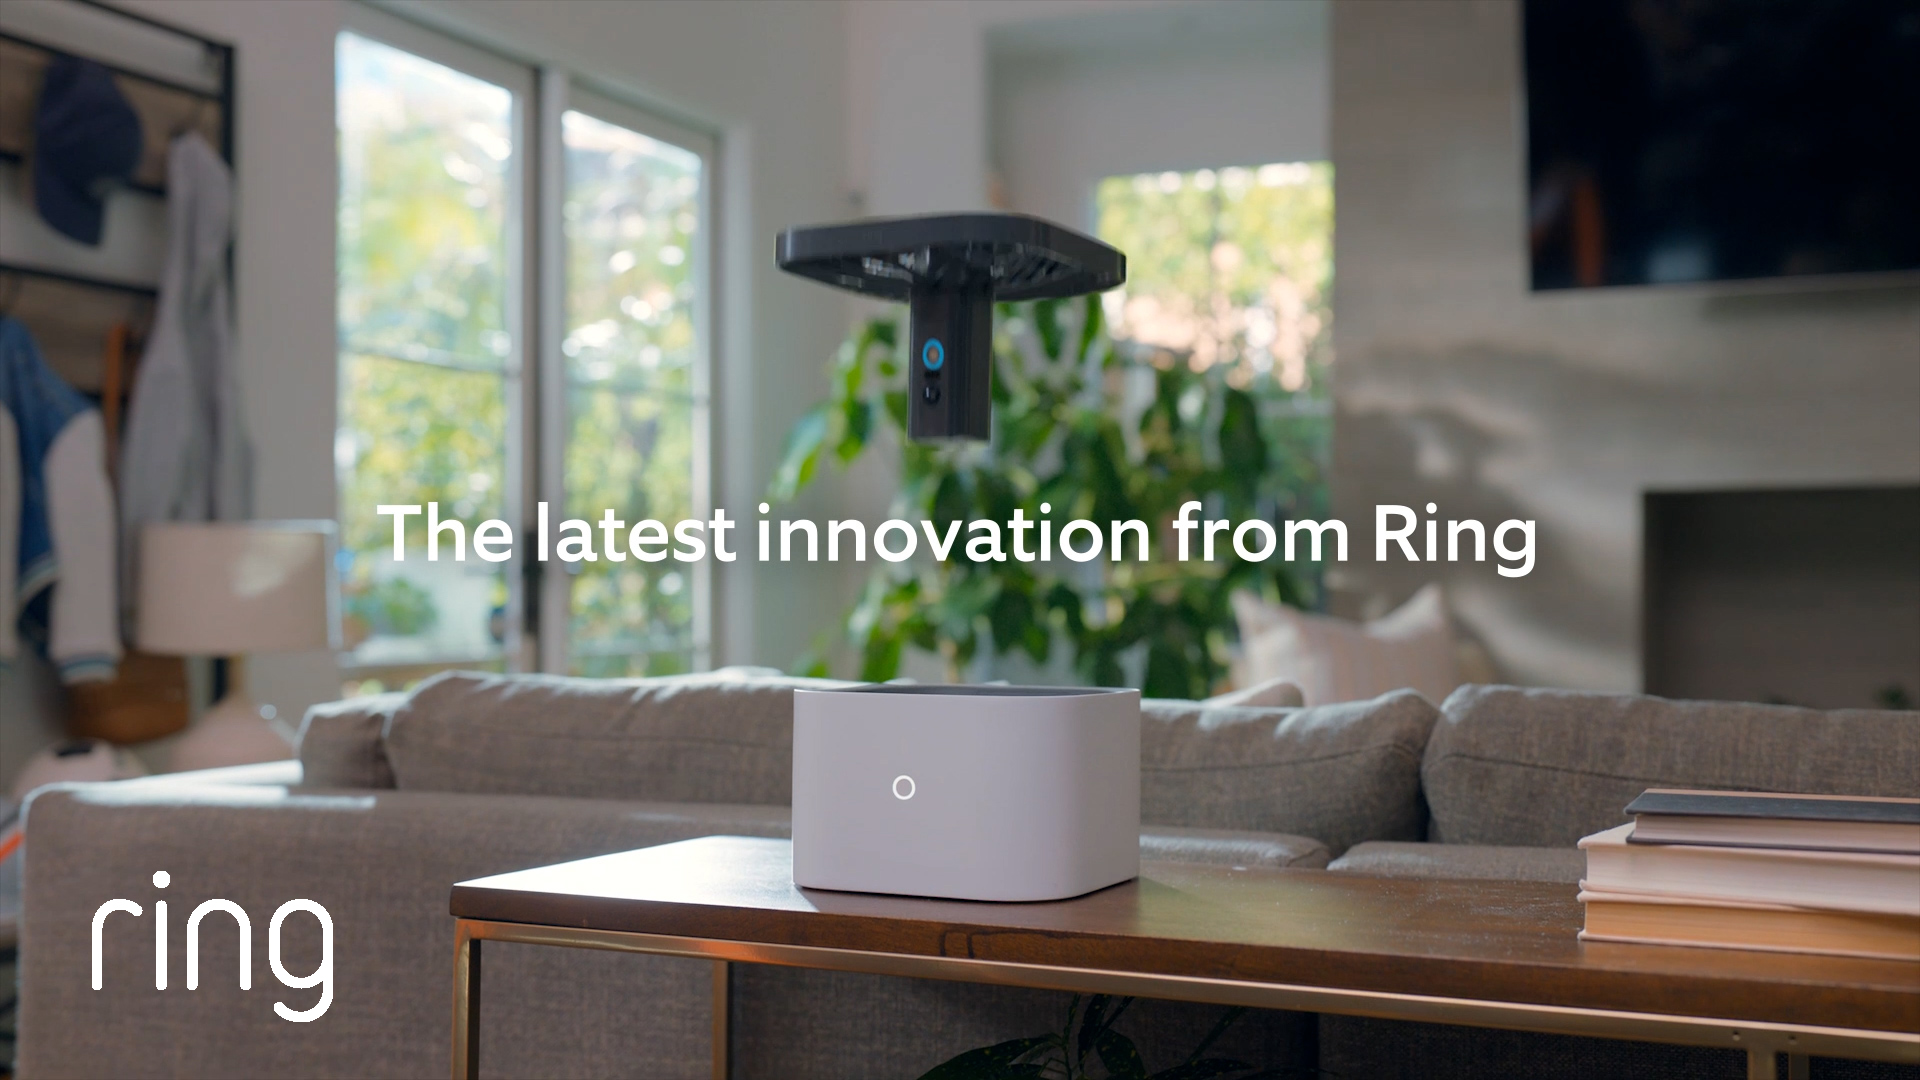 New Ring Products & Features The Future of WholeHome Security is Here